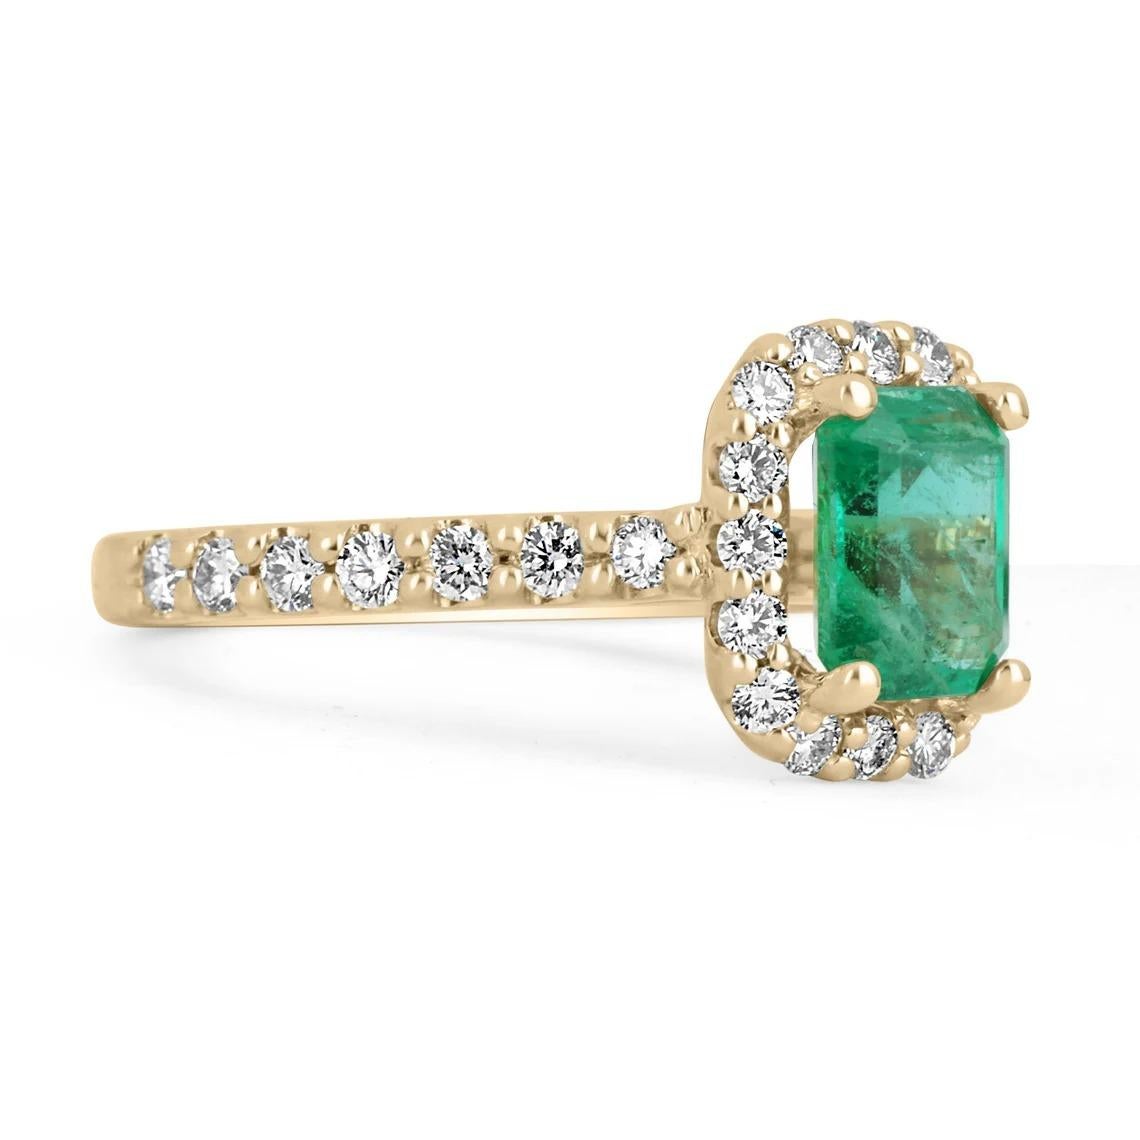 The perfect emerald and diamond halo engagement ring! The center stone showcases a full 1.50-carat natural emerald-emerald cut. This emerald displays a gorgeous dark green color and perfectly imperfect imperfections within this natural gemstone.